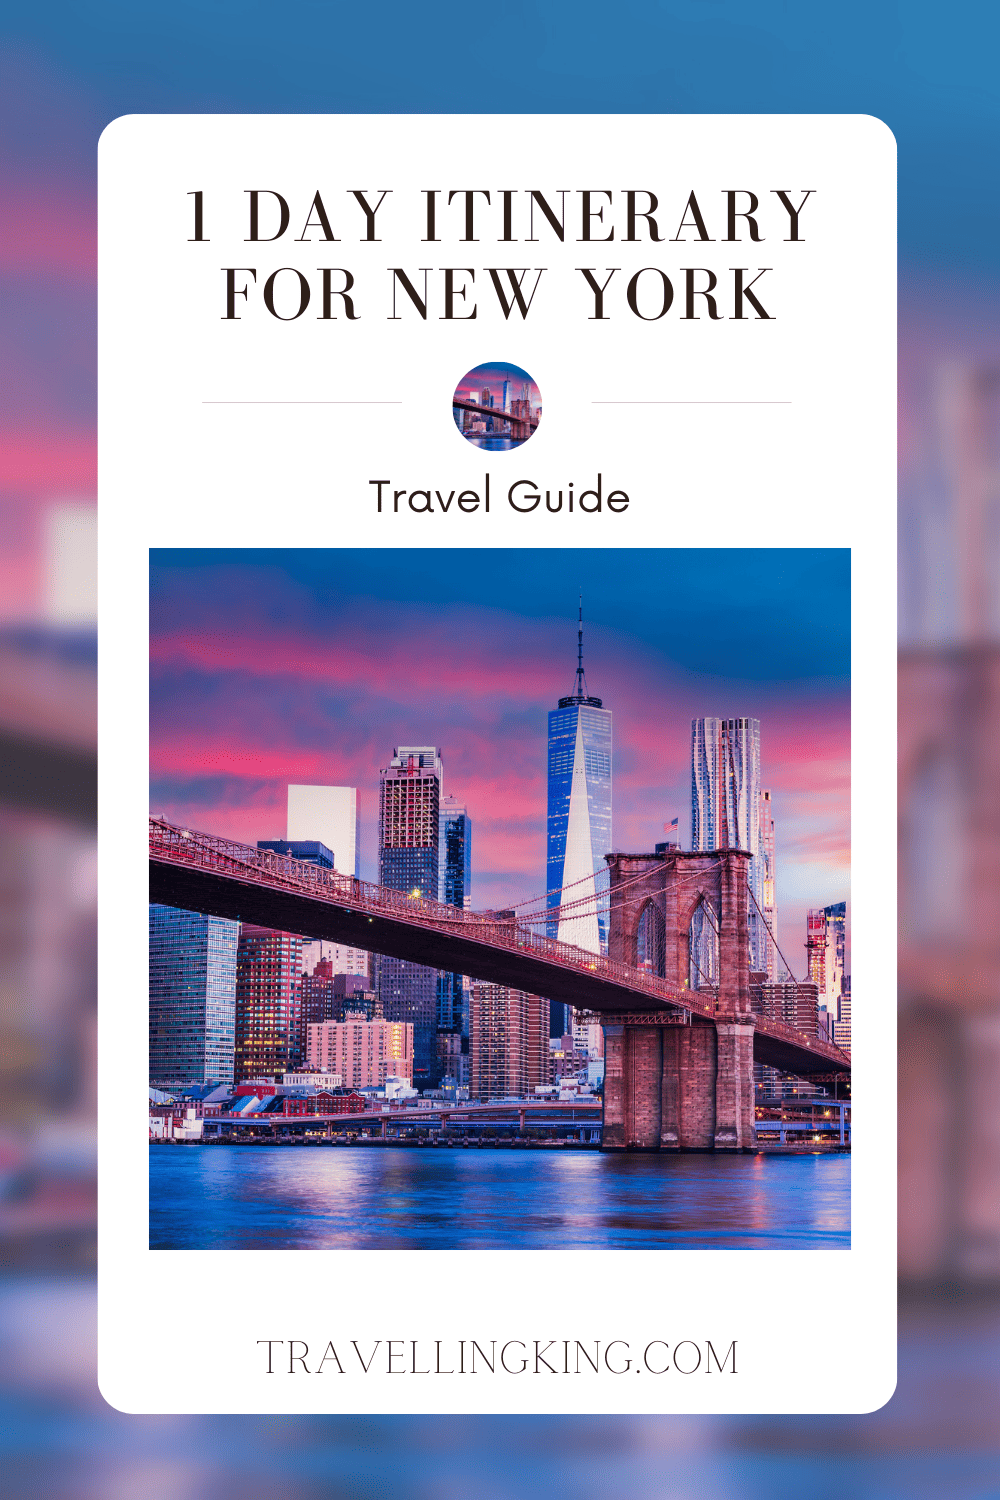 1 Day Itinerary for New York